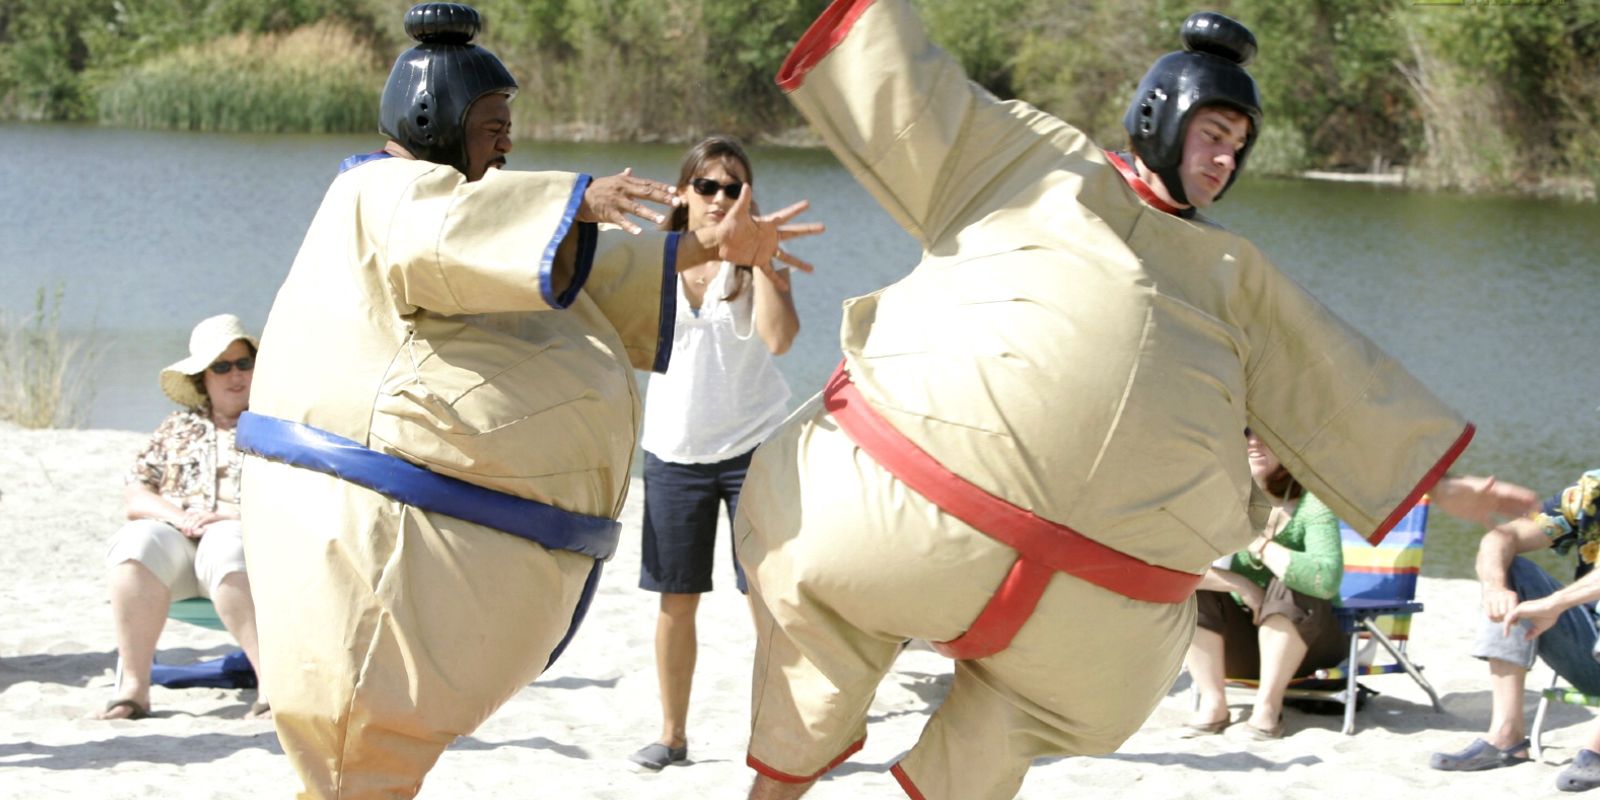 The Office Season 3 episode Beach Games with Stanley and Jim in Sumo suits